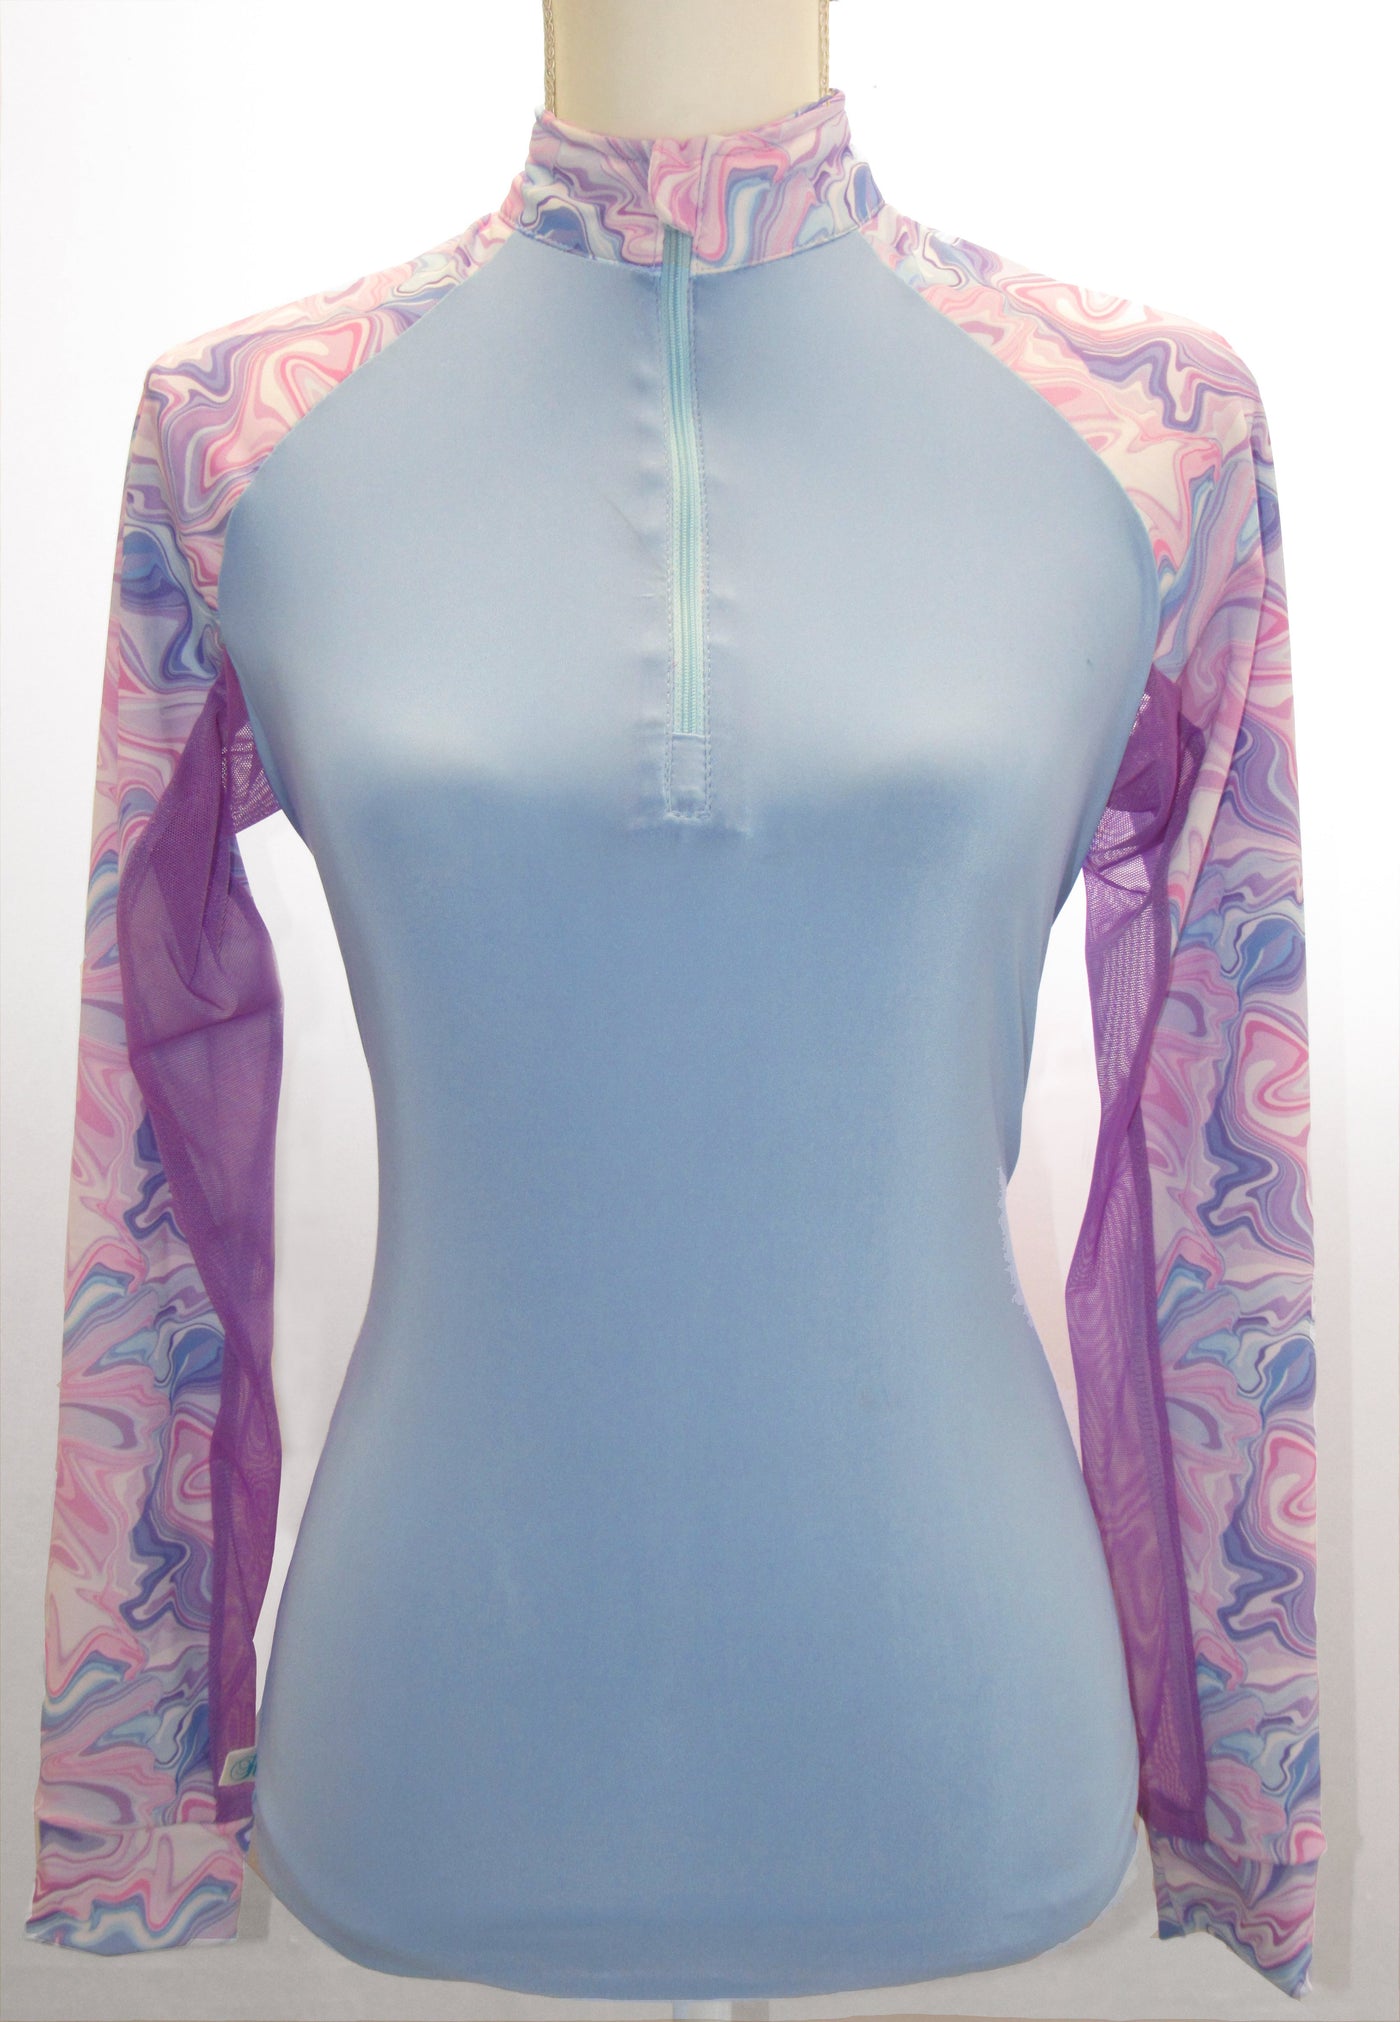 Pastel Color Choice Sunshirt with Swirl Pattern - Adult + Youth Sizes